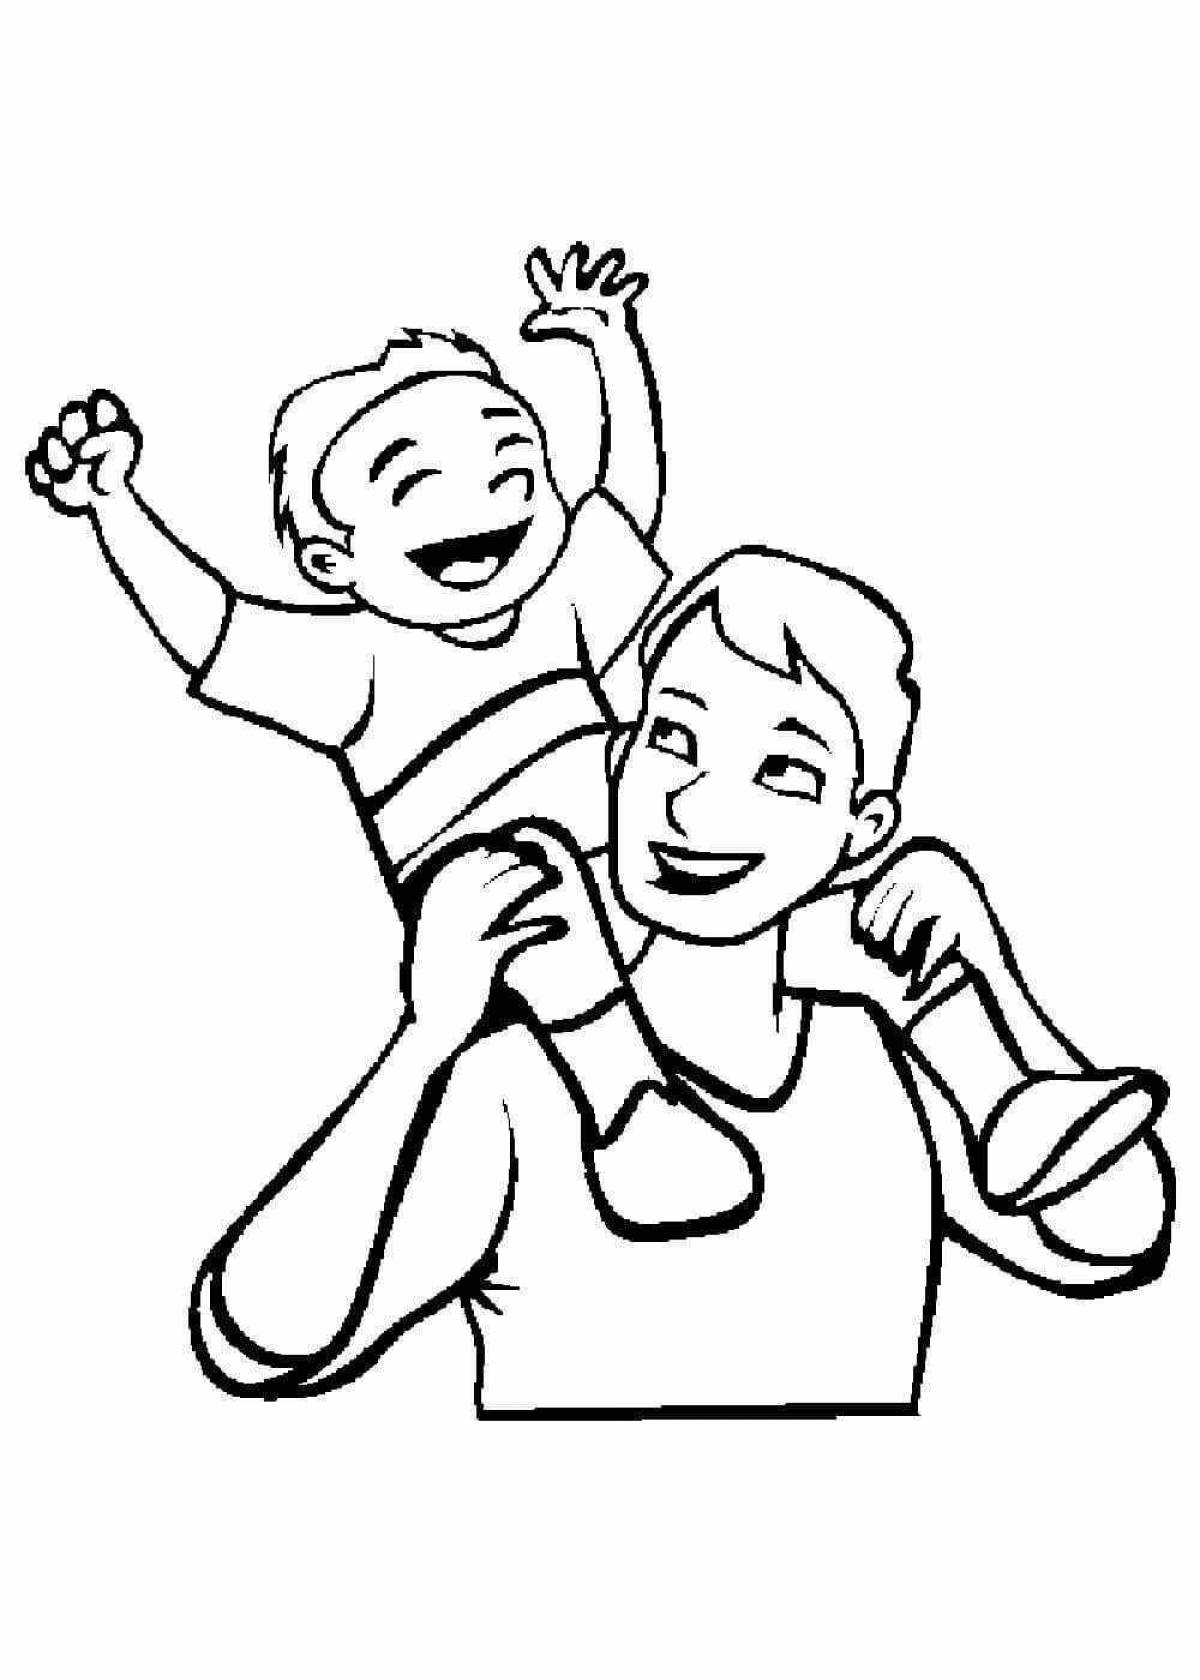 Playful son and dad coloring book